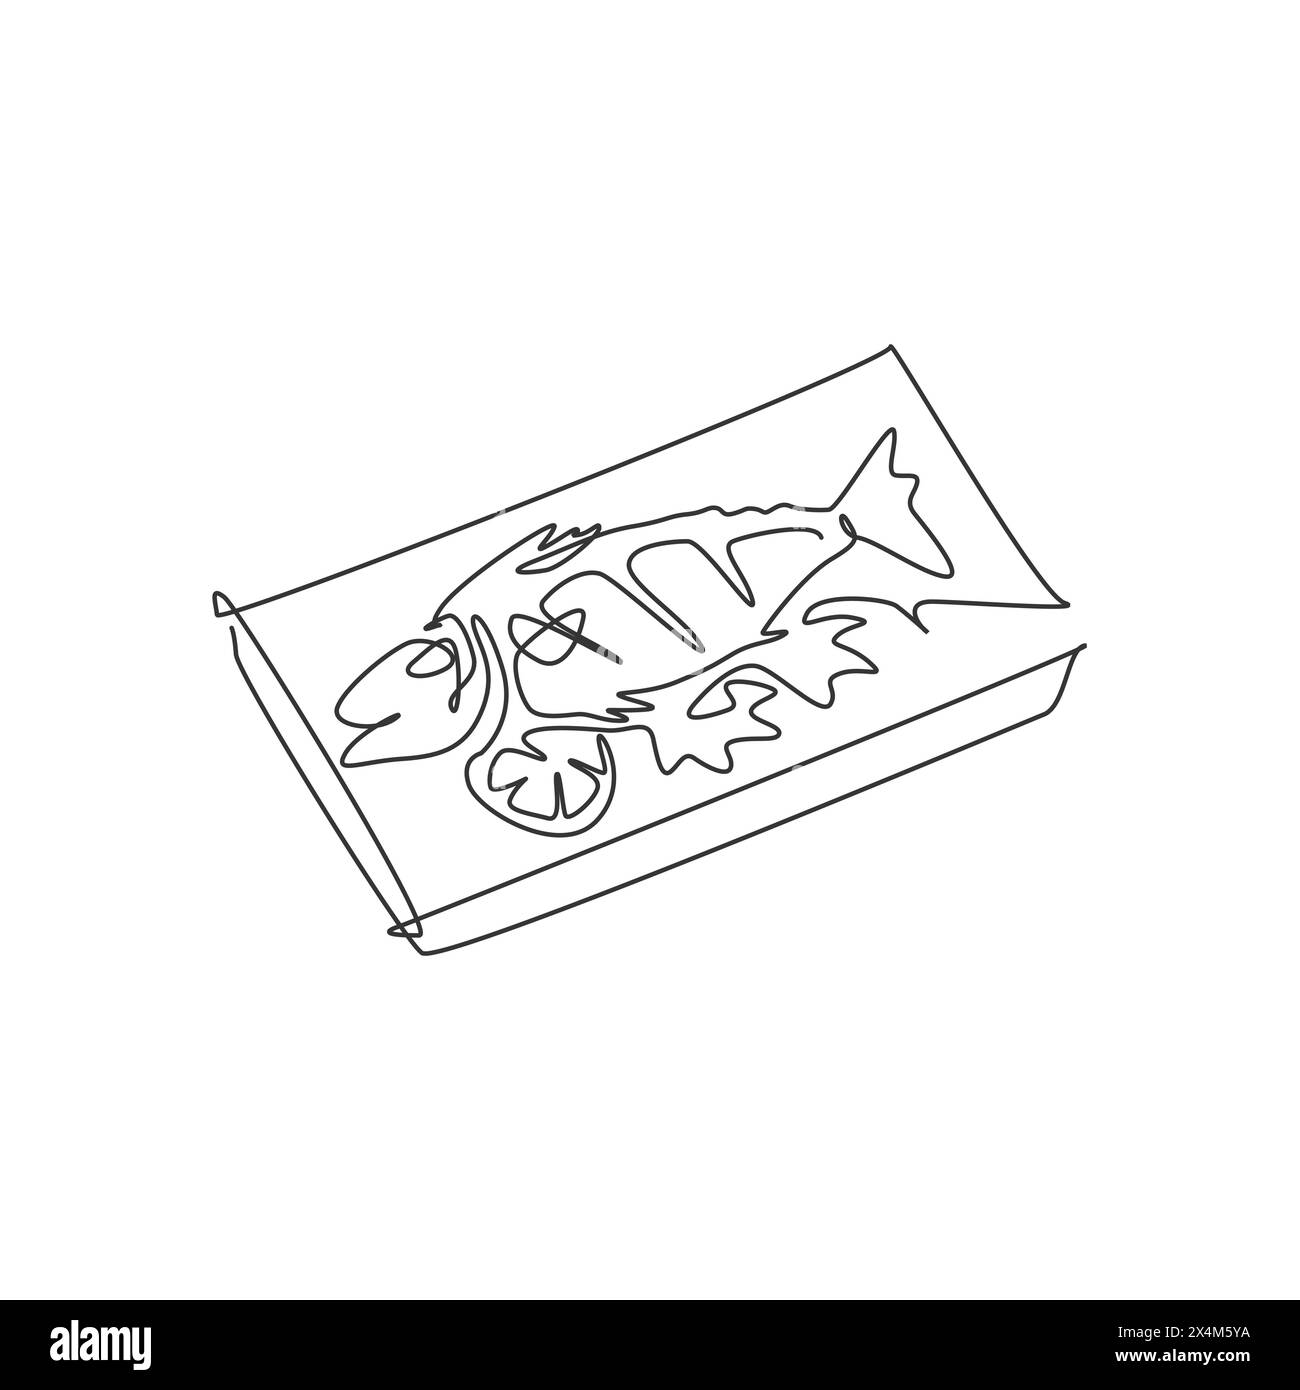 One single line drawing of fresh tasty delicious baked salmon fish on hot plate logo vector illustration. Seafood cafe menu and restaurant badge conce Stock Vector